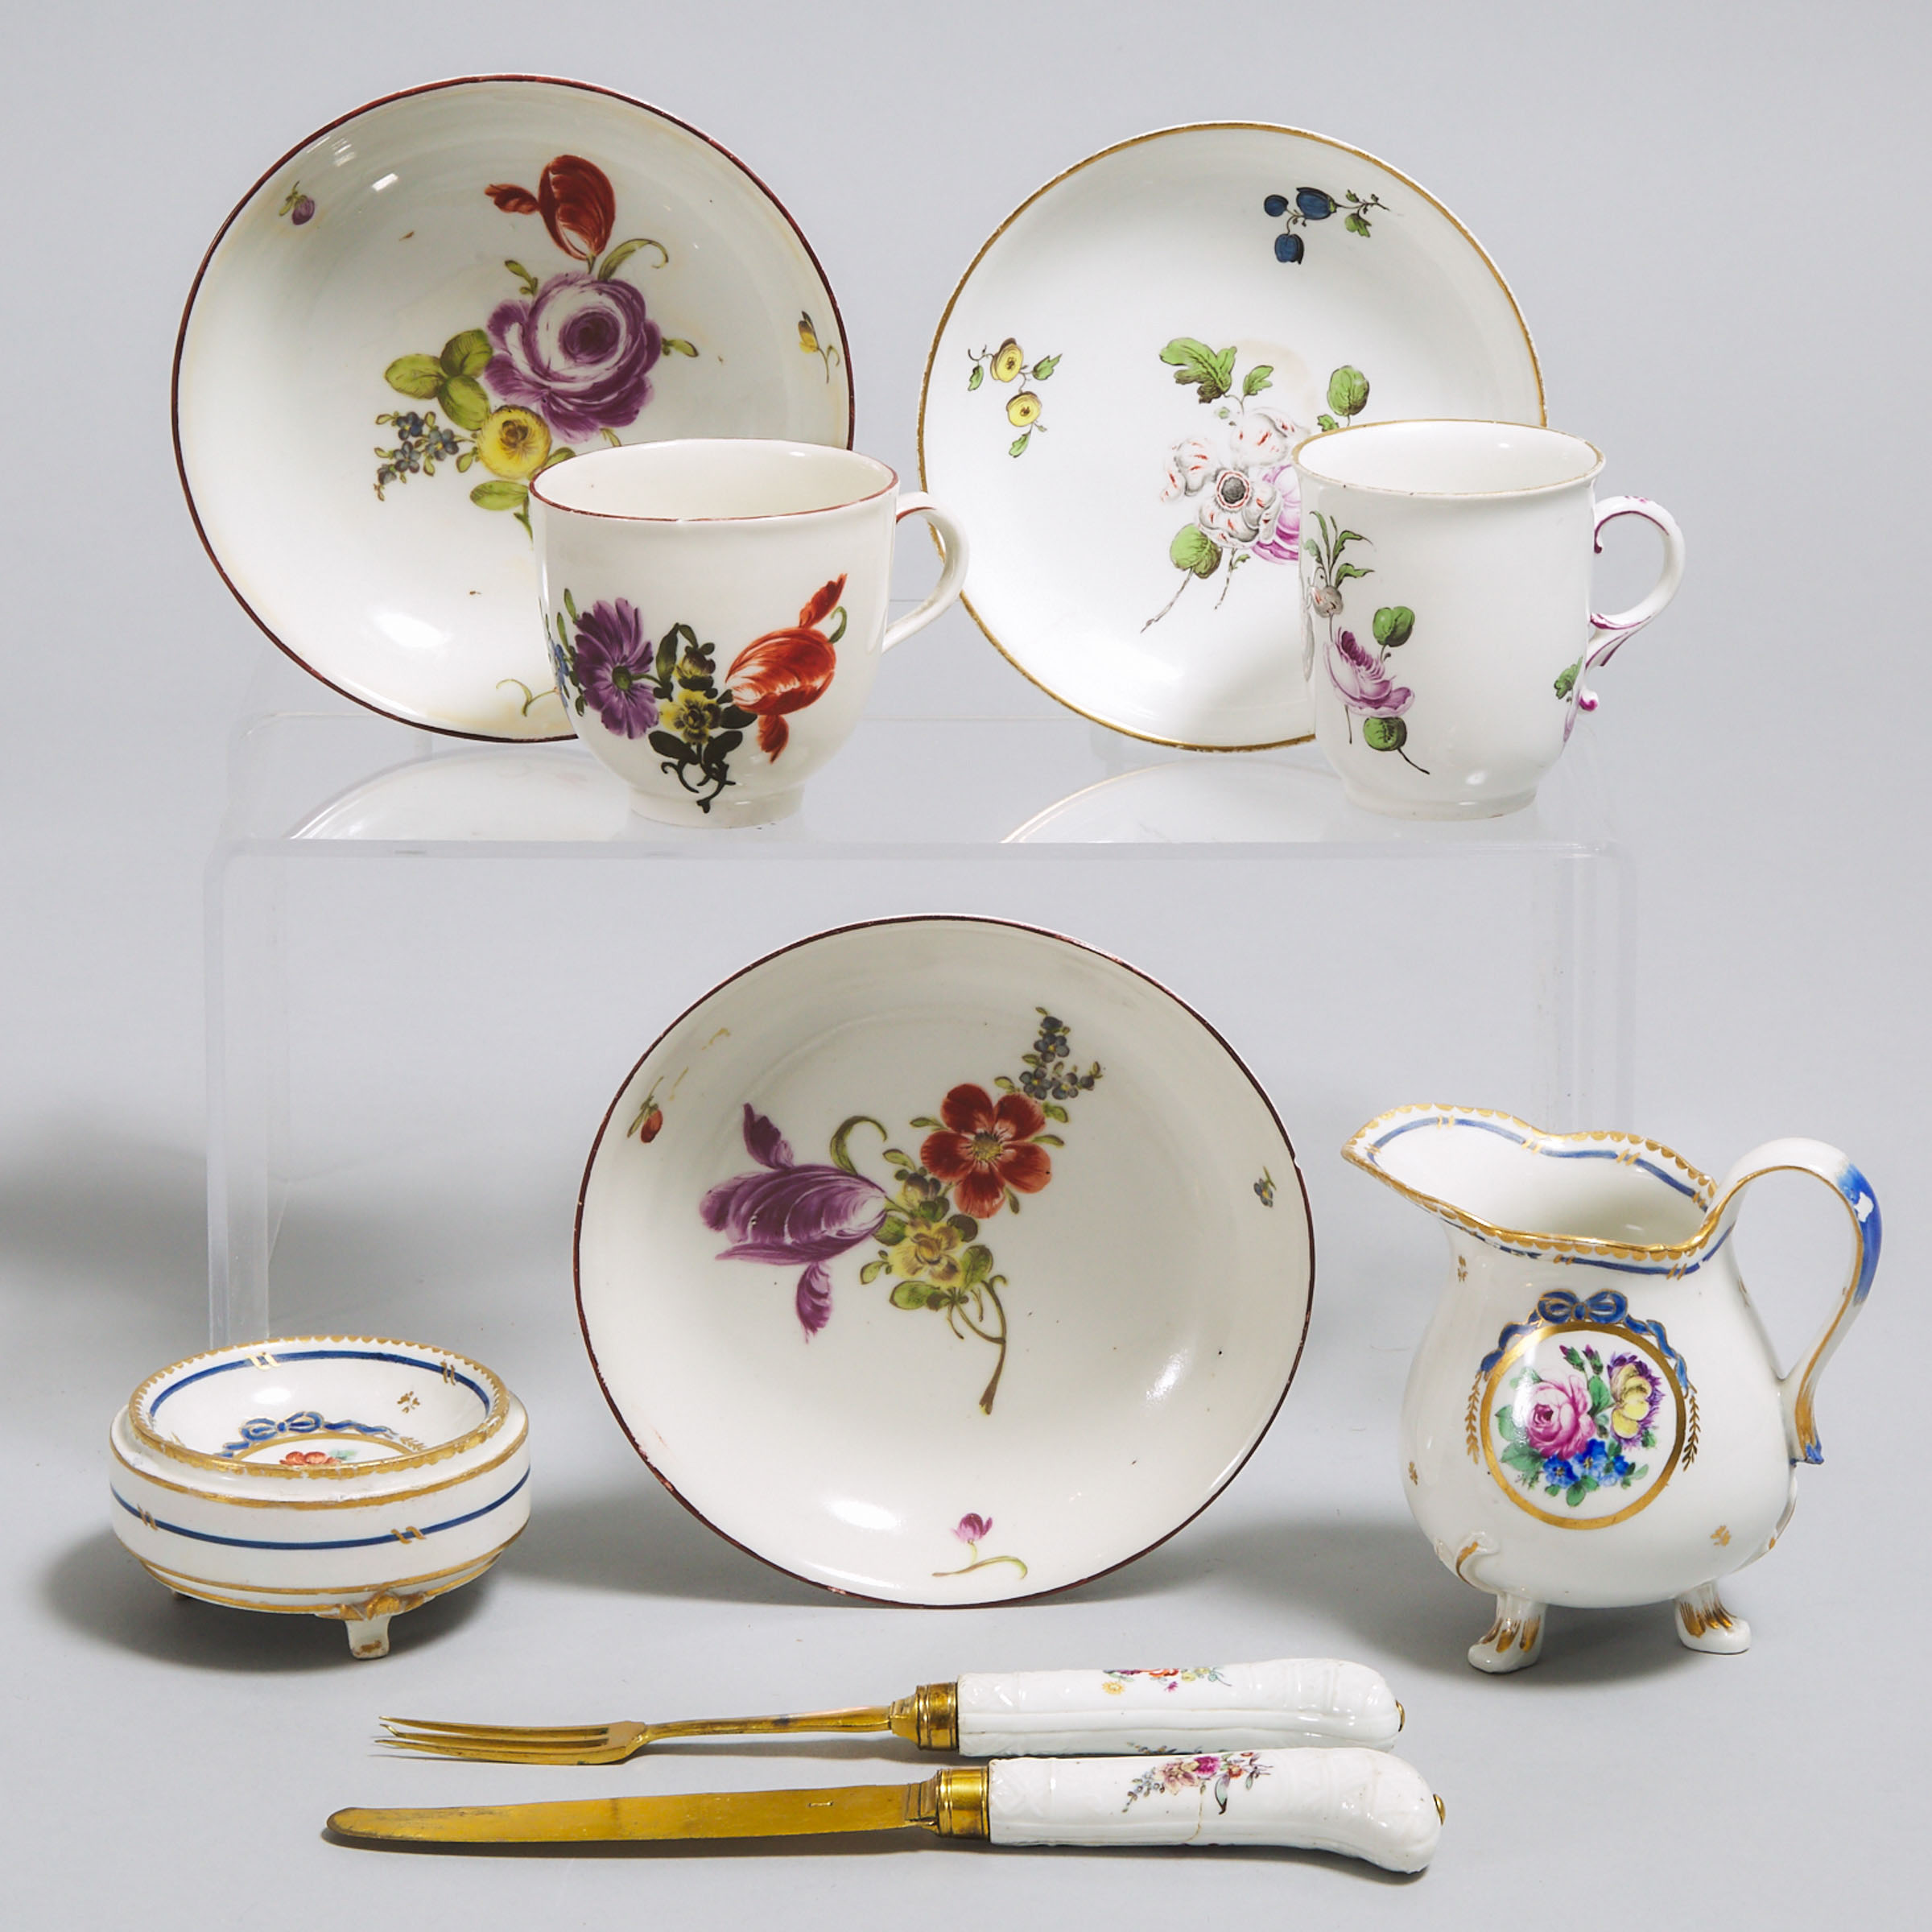 Group of German and Austrian Porcelain, late 18th/early 19th century